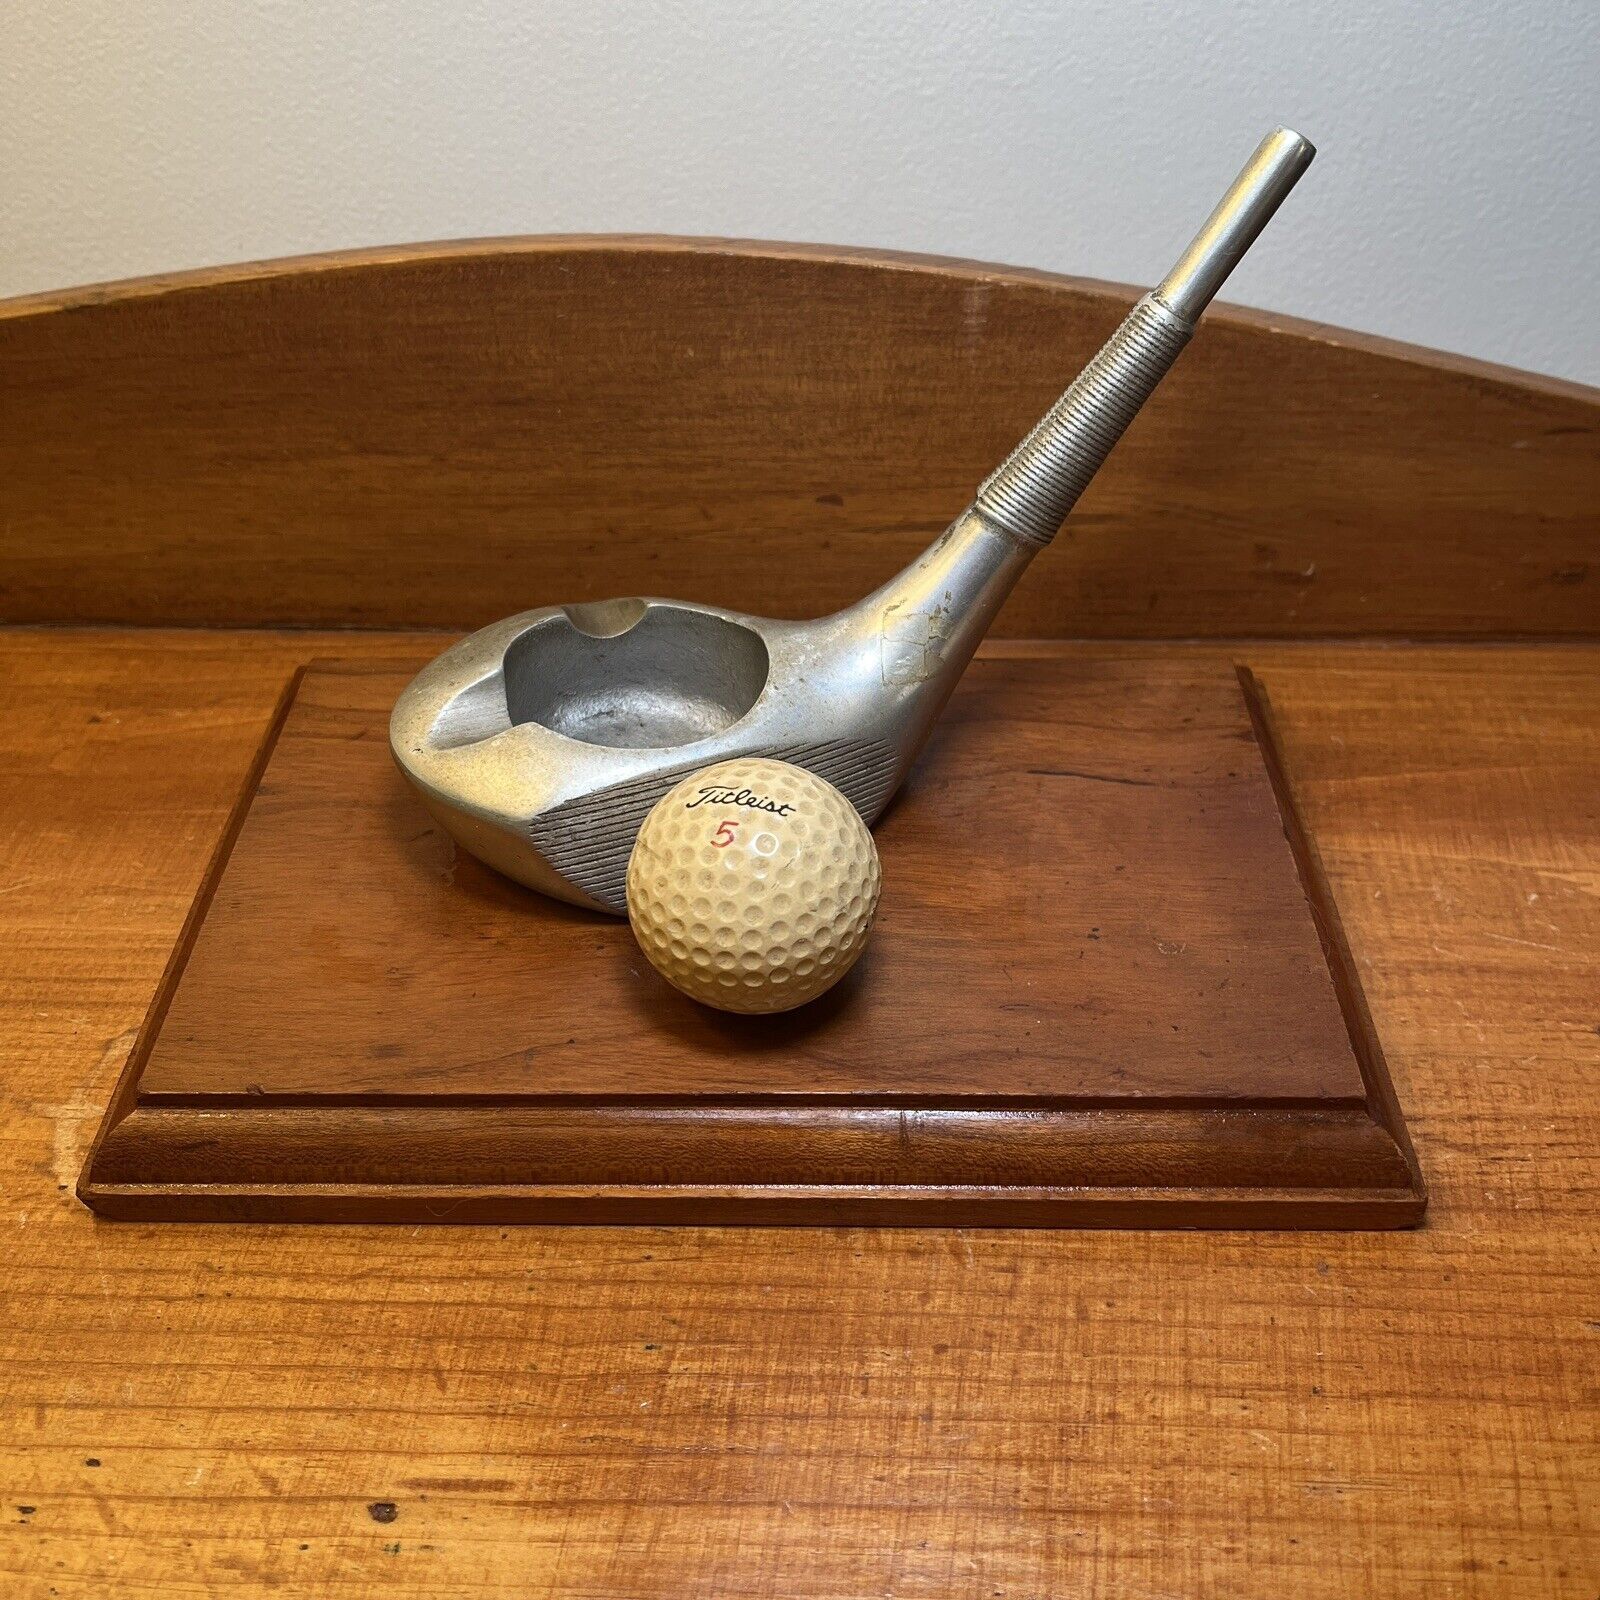 Vintage Golf Club And Titleist Golf Ball Ash Tray, Mounted On Wood, Rare Unusual